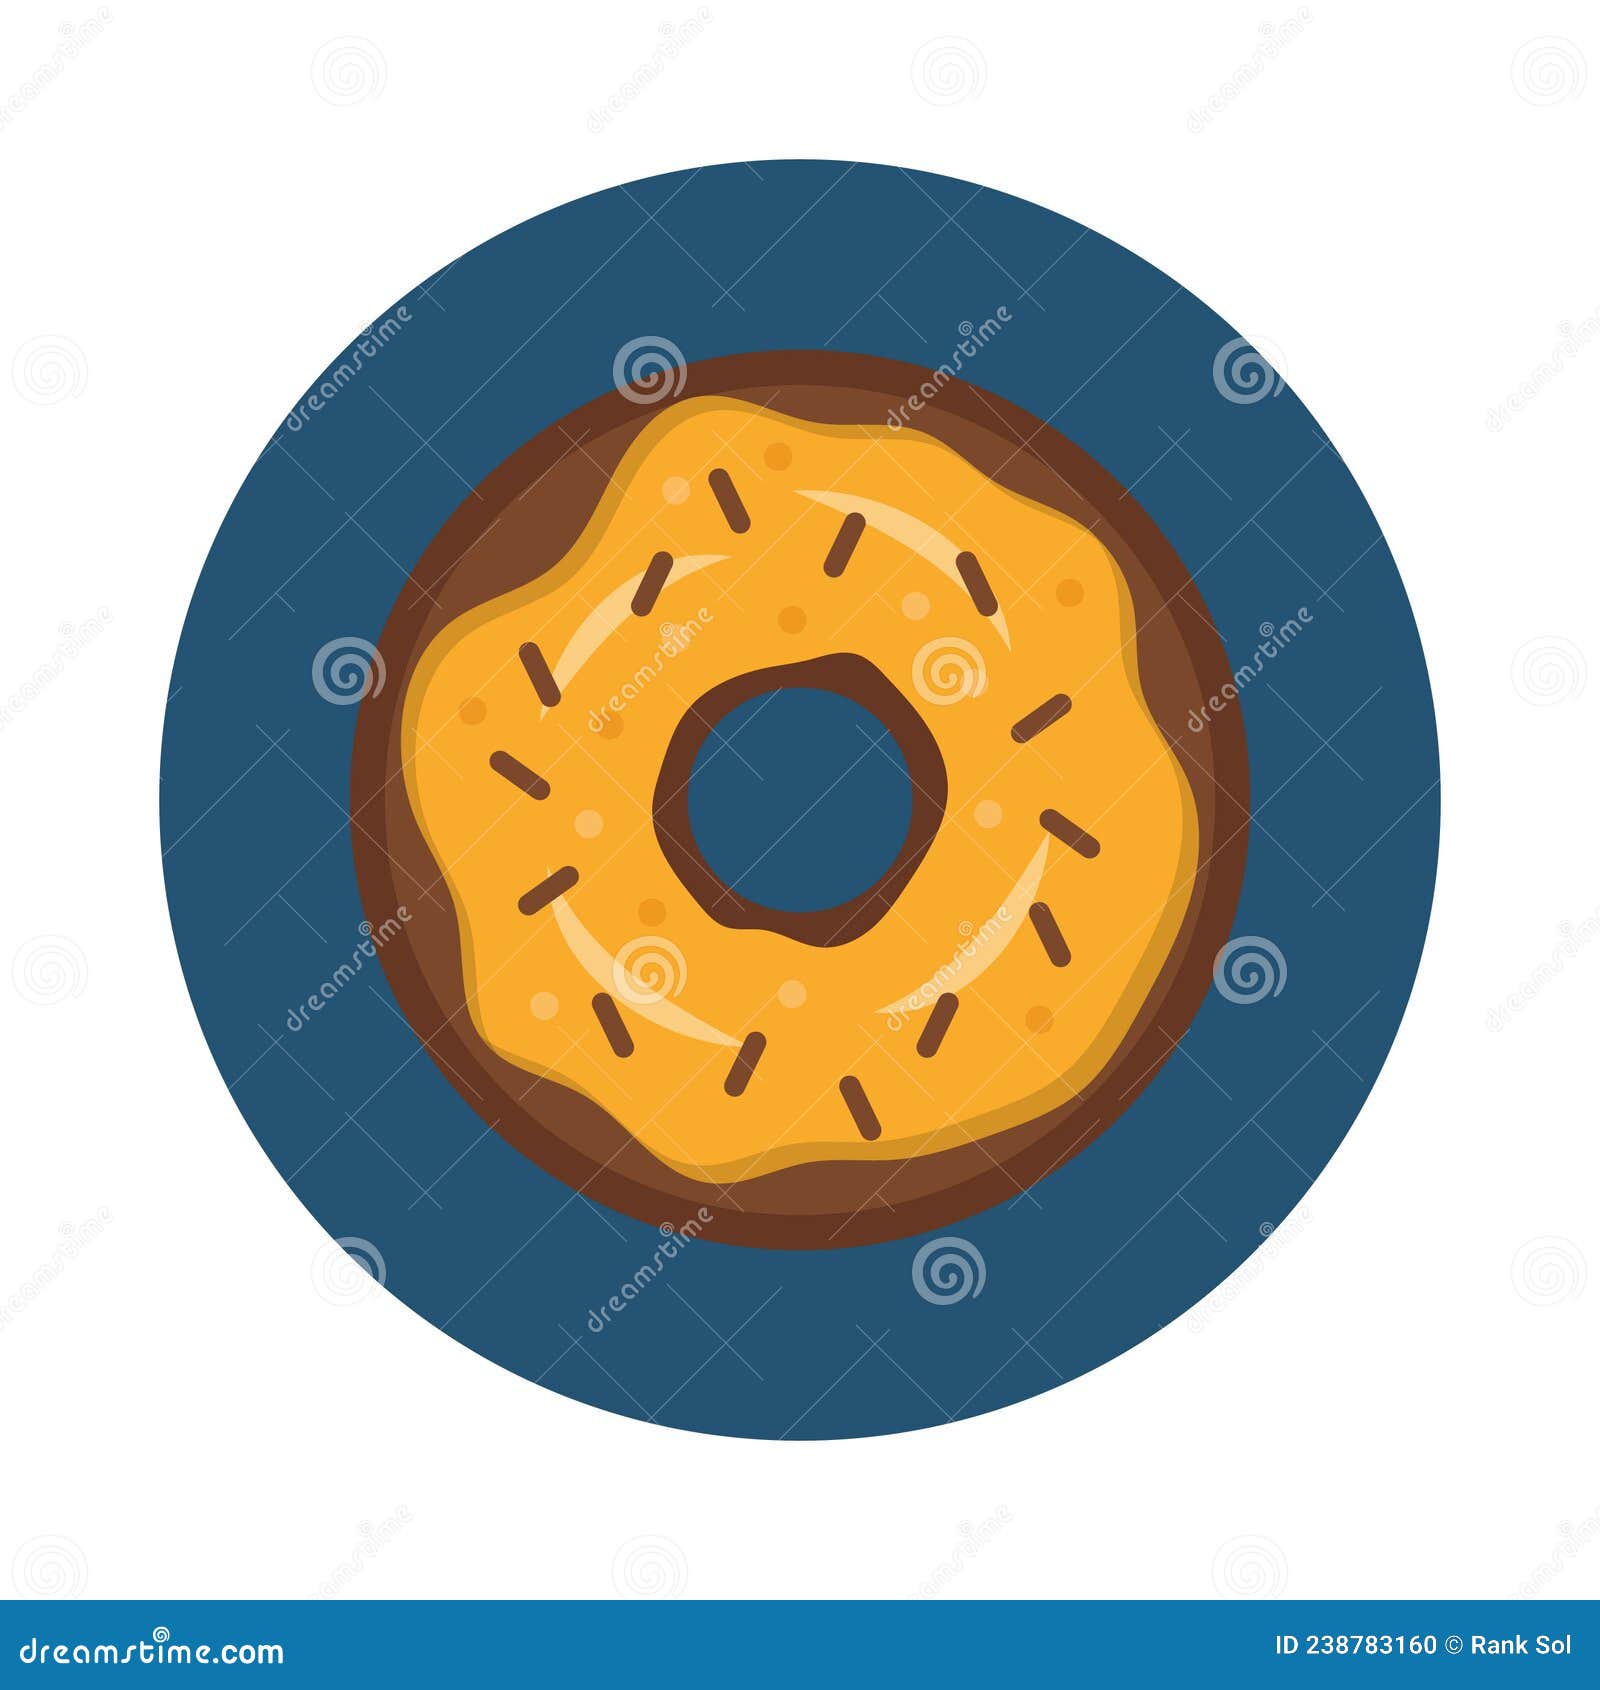 donut  icon which can easily modify or edit